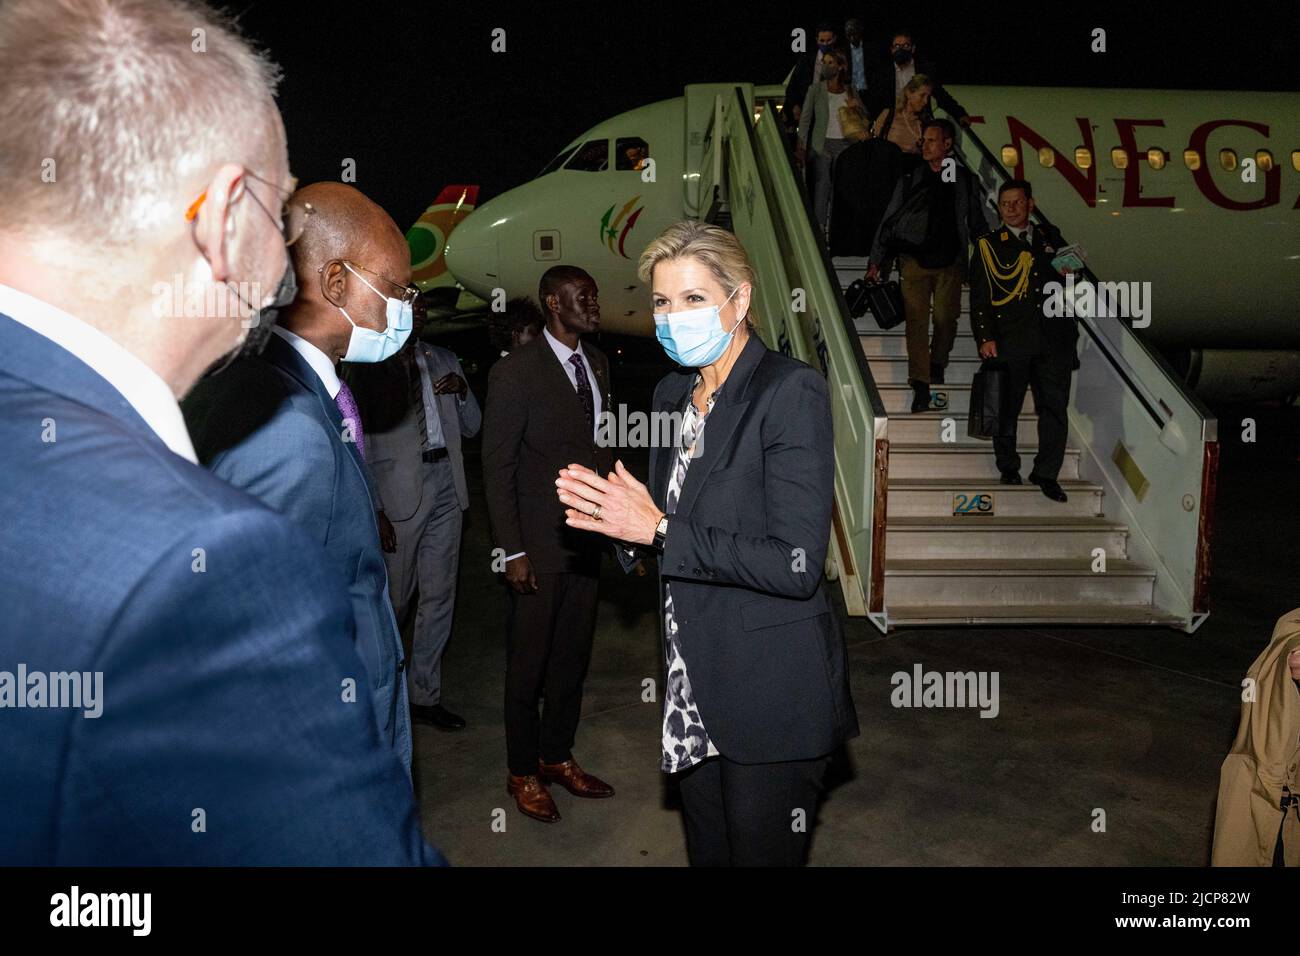 2022-06-15 01:05:56 DAKAR - Queen Maxima arrives at Dakar's Blaise Diagne Airport in Senegal. Maxima visits Ivory Coast, and Senegal, in her role as the United Nations Secretary-General's Special Advocate for Inclusive Finance for Development. ANP POOL MISCHA SCHOEMAKER netherlands out - belgium out Stock Photo